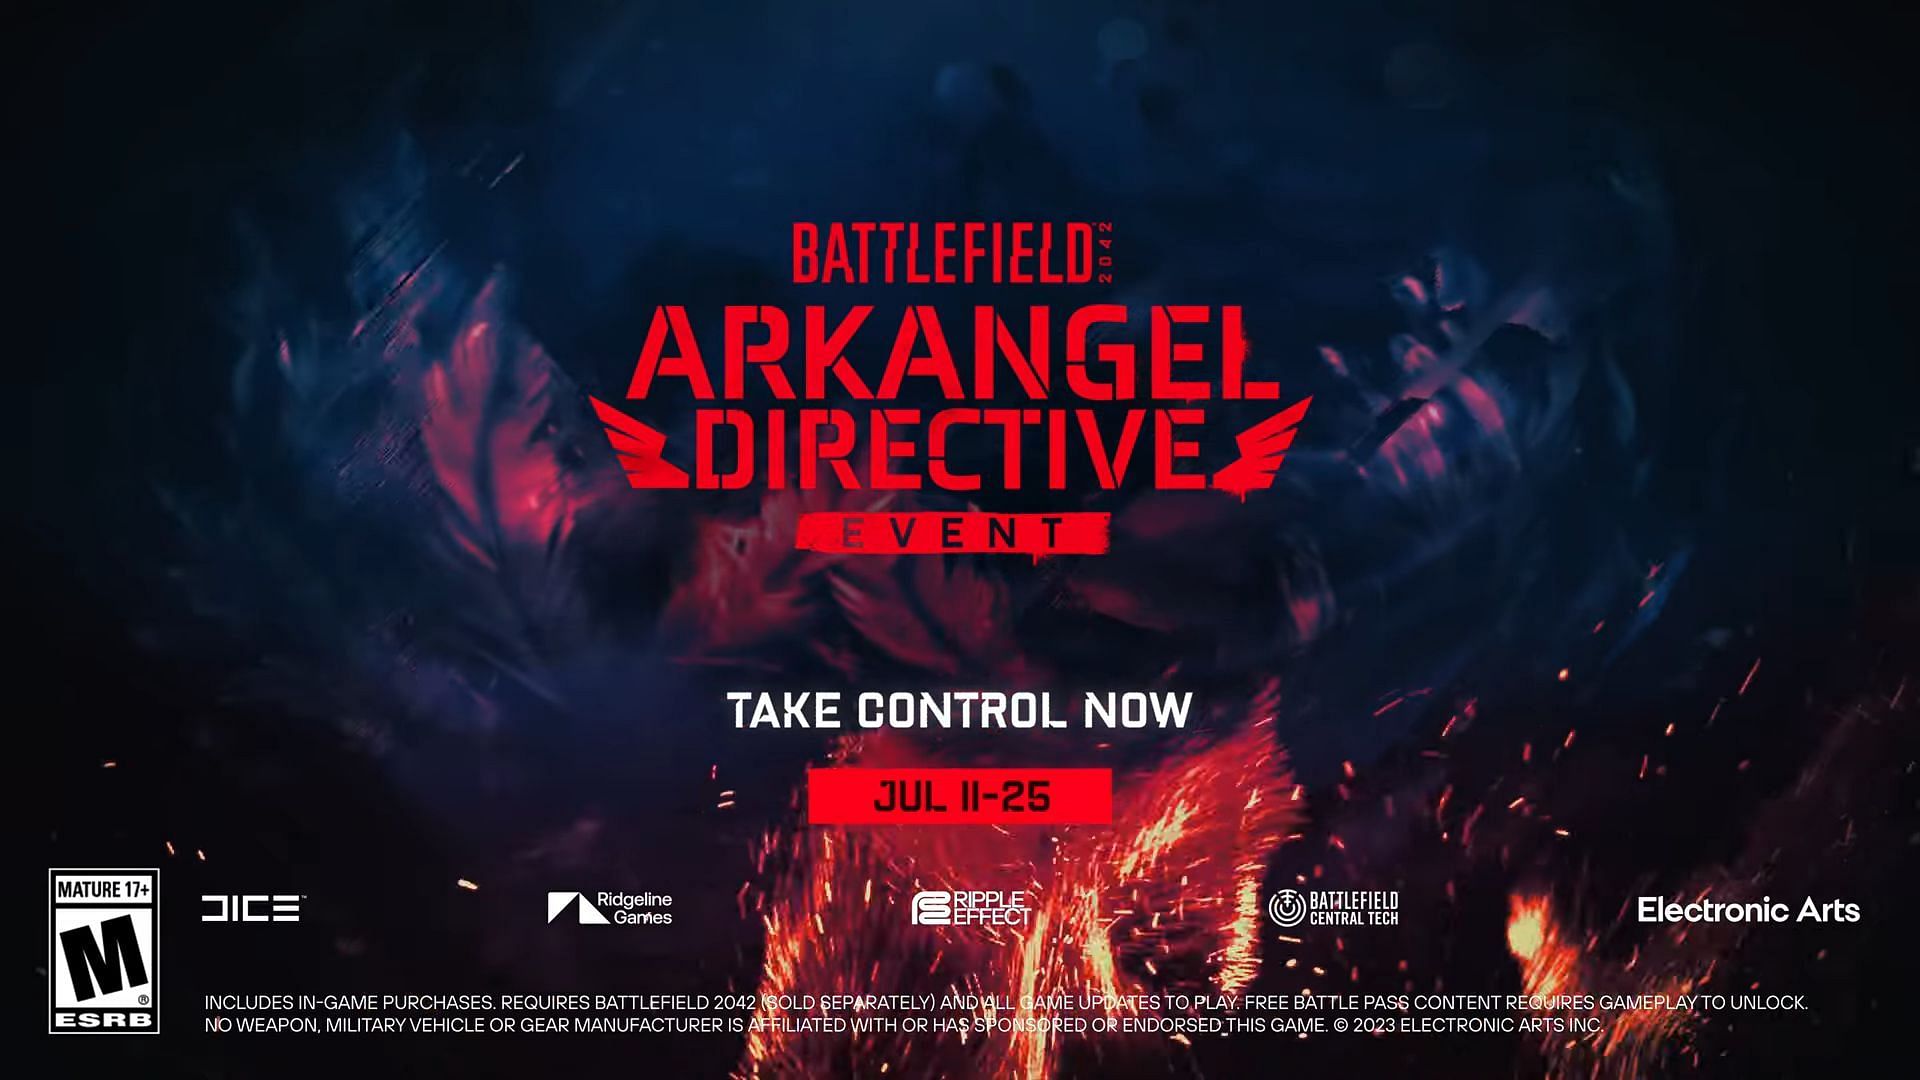 Battlefield 2042 Reveals More About The Arkangel Directive Event